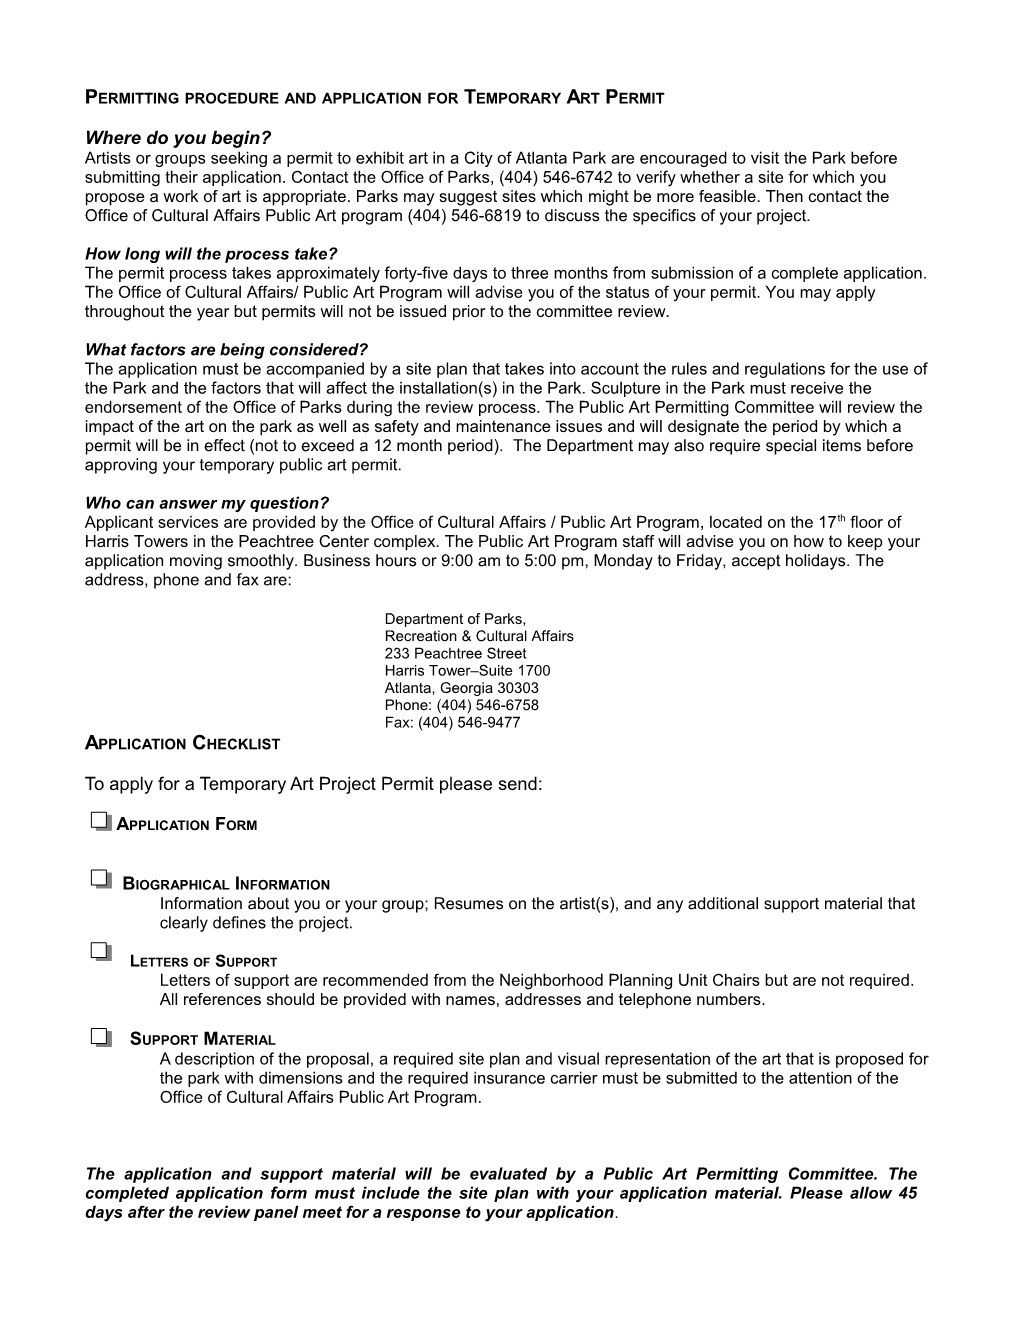 Permitting Procedure and Application for Temporary Art Permit